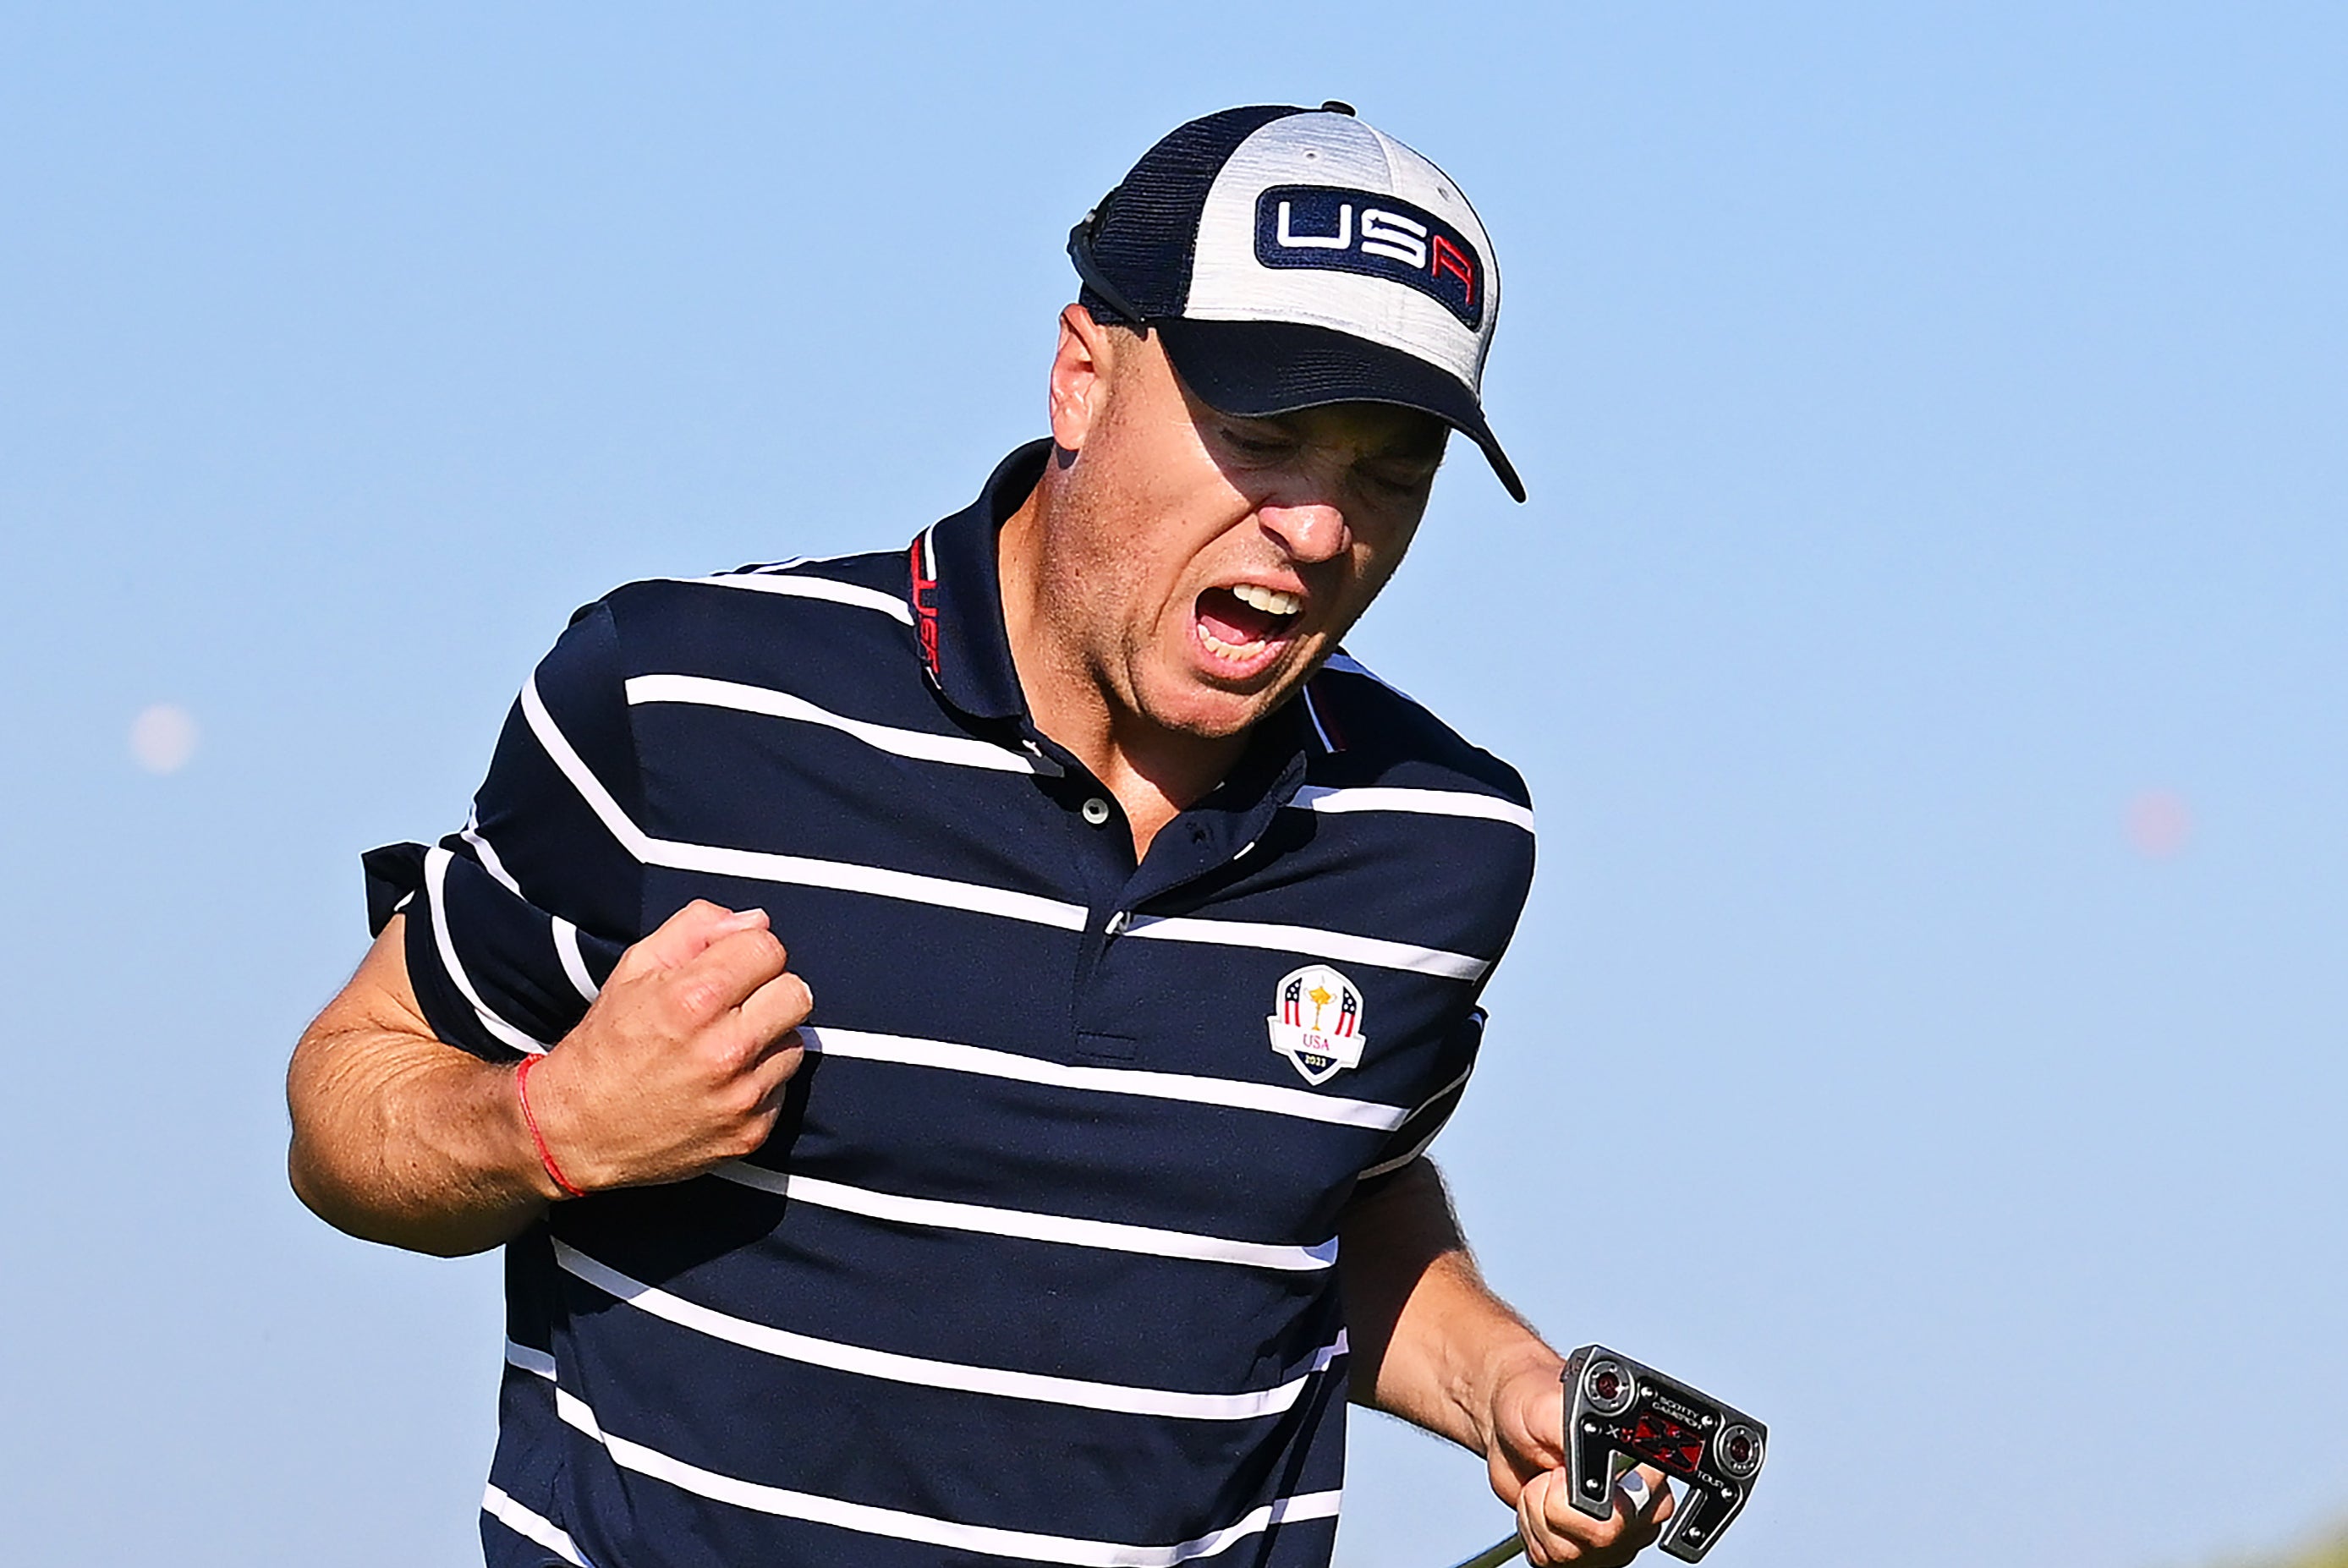 Justin Thomas celebrates after a vital putt on the 15th green in the Ryder Cup 2023